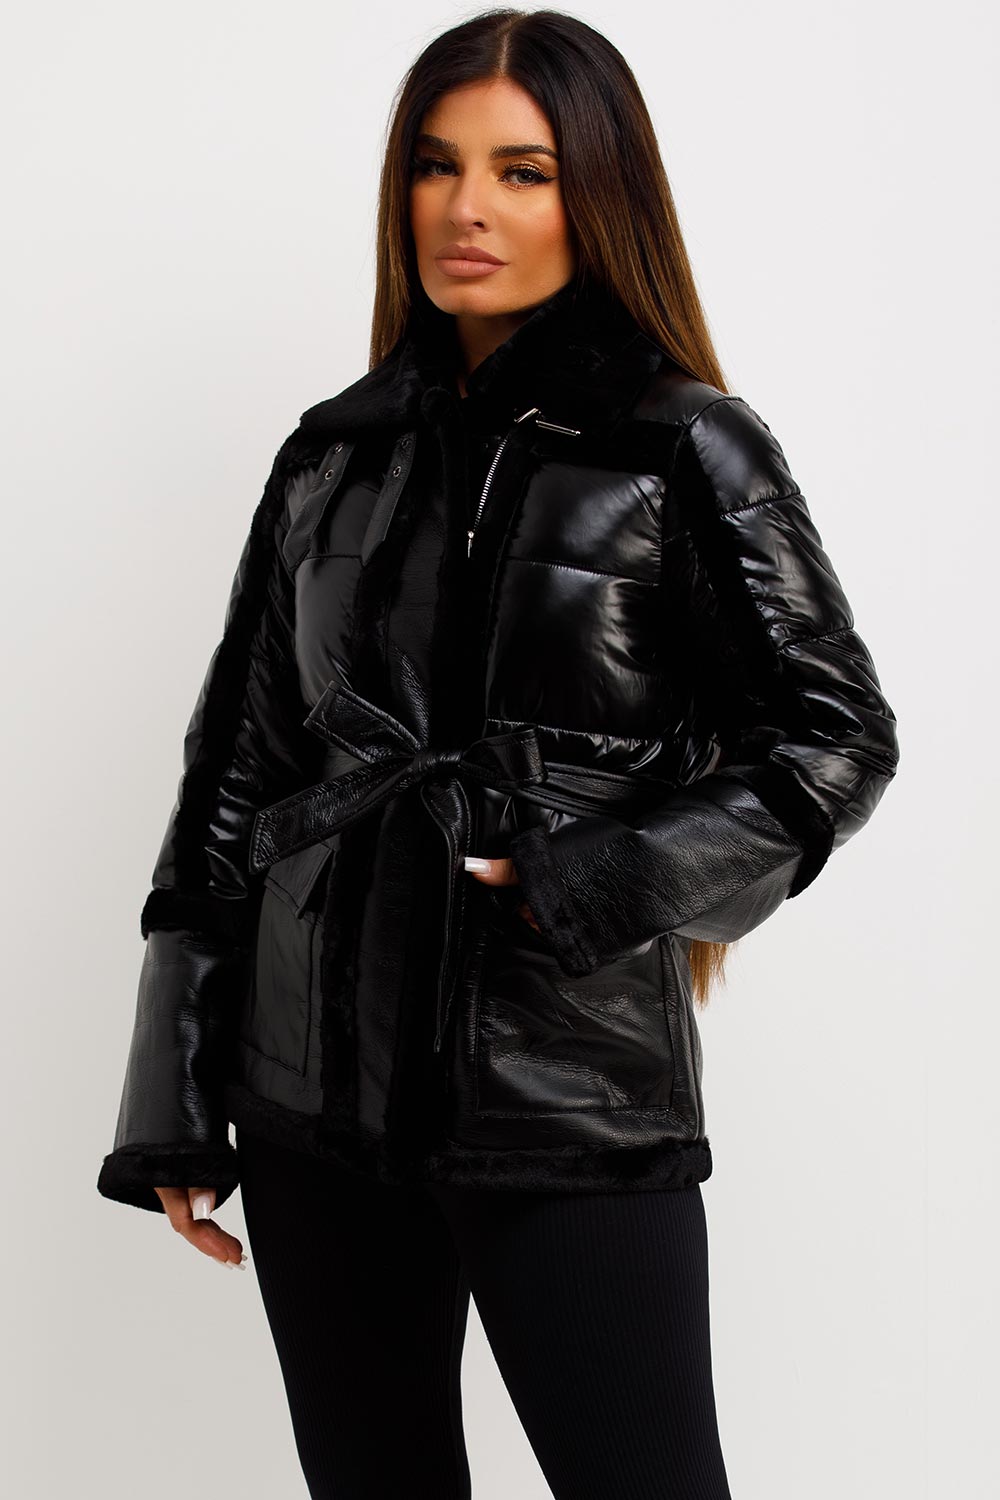 faux fur faux suede shiny padded jacket womens outerwear